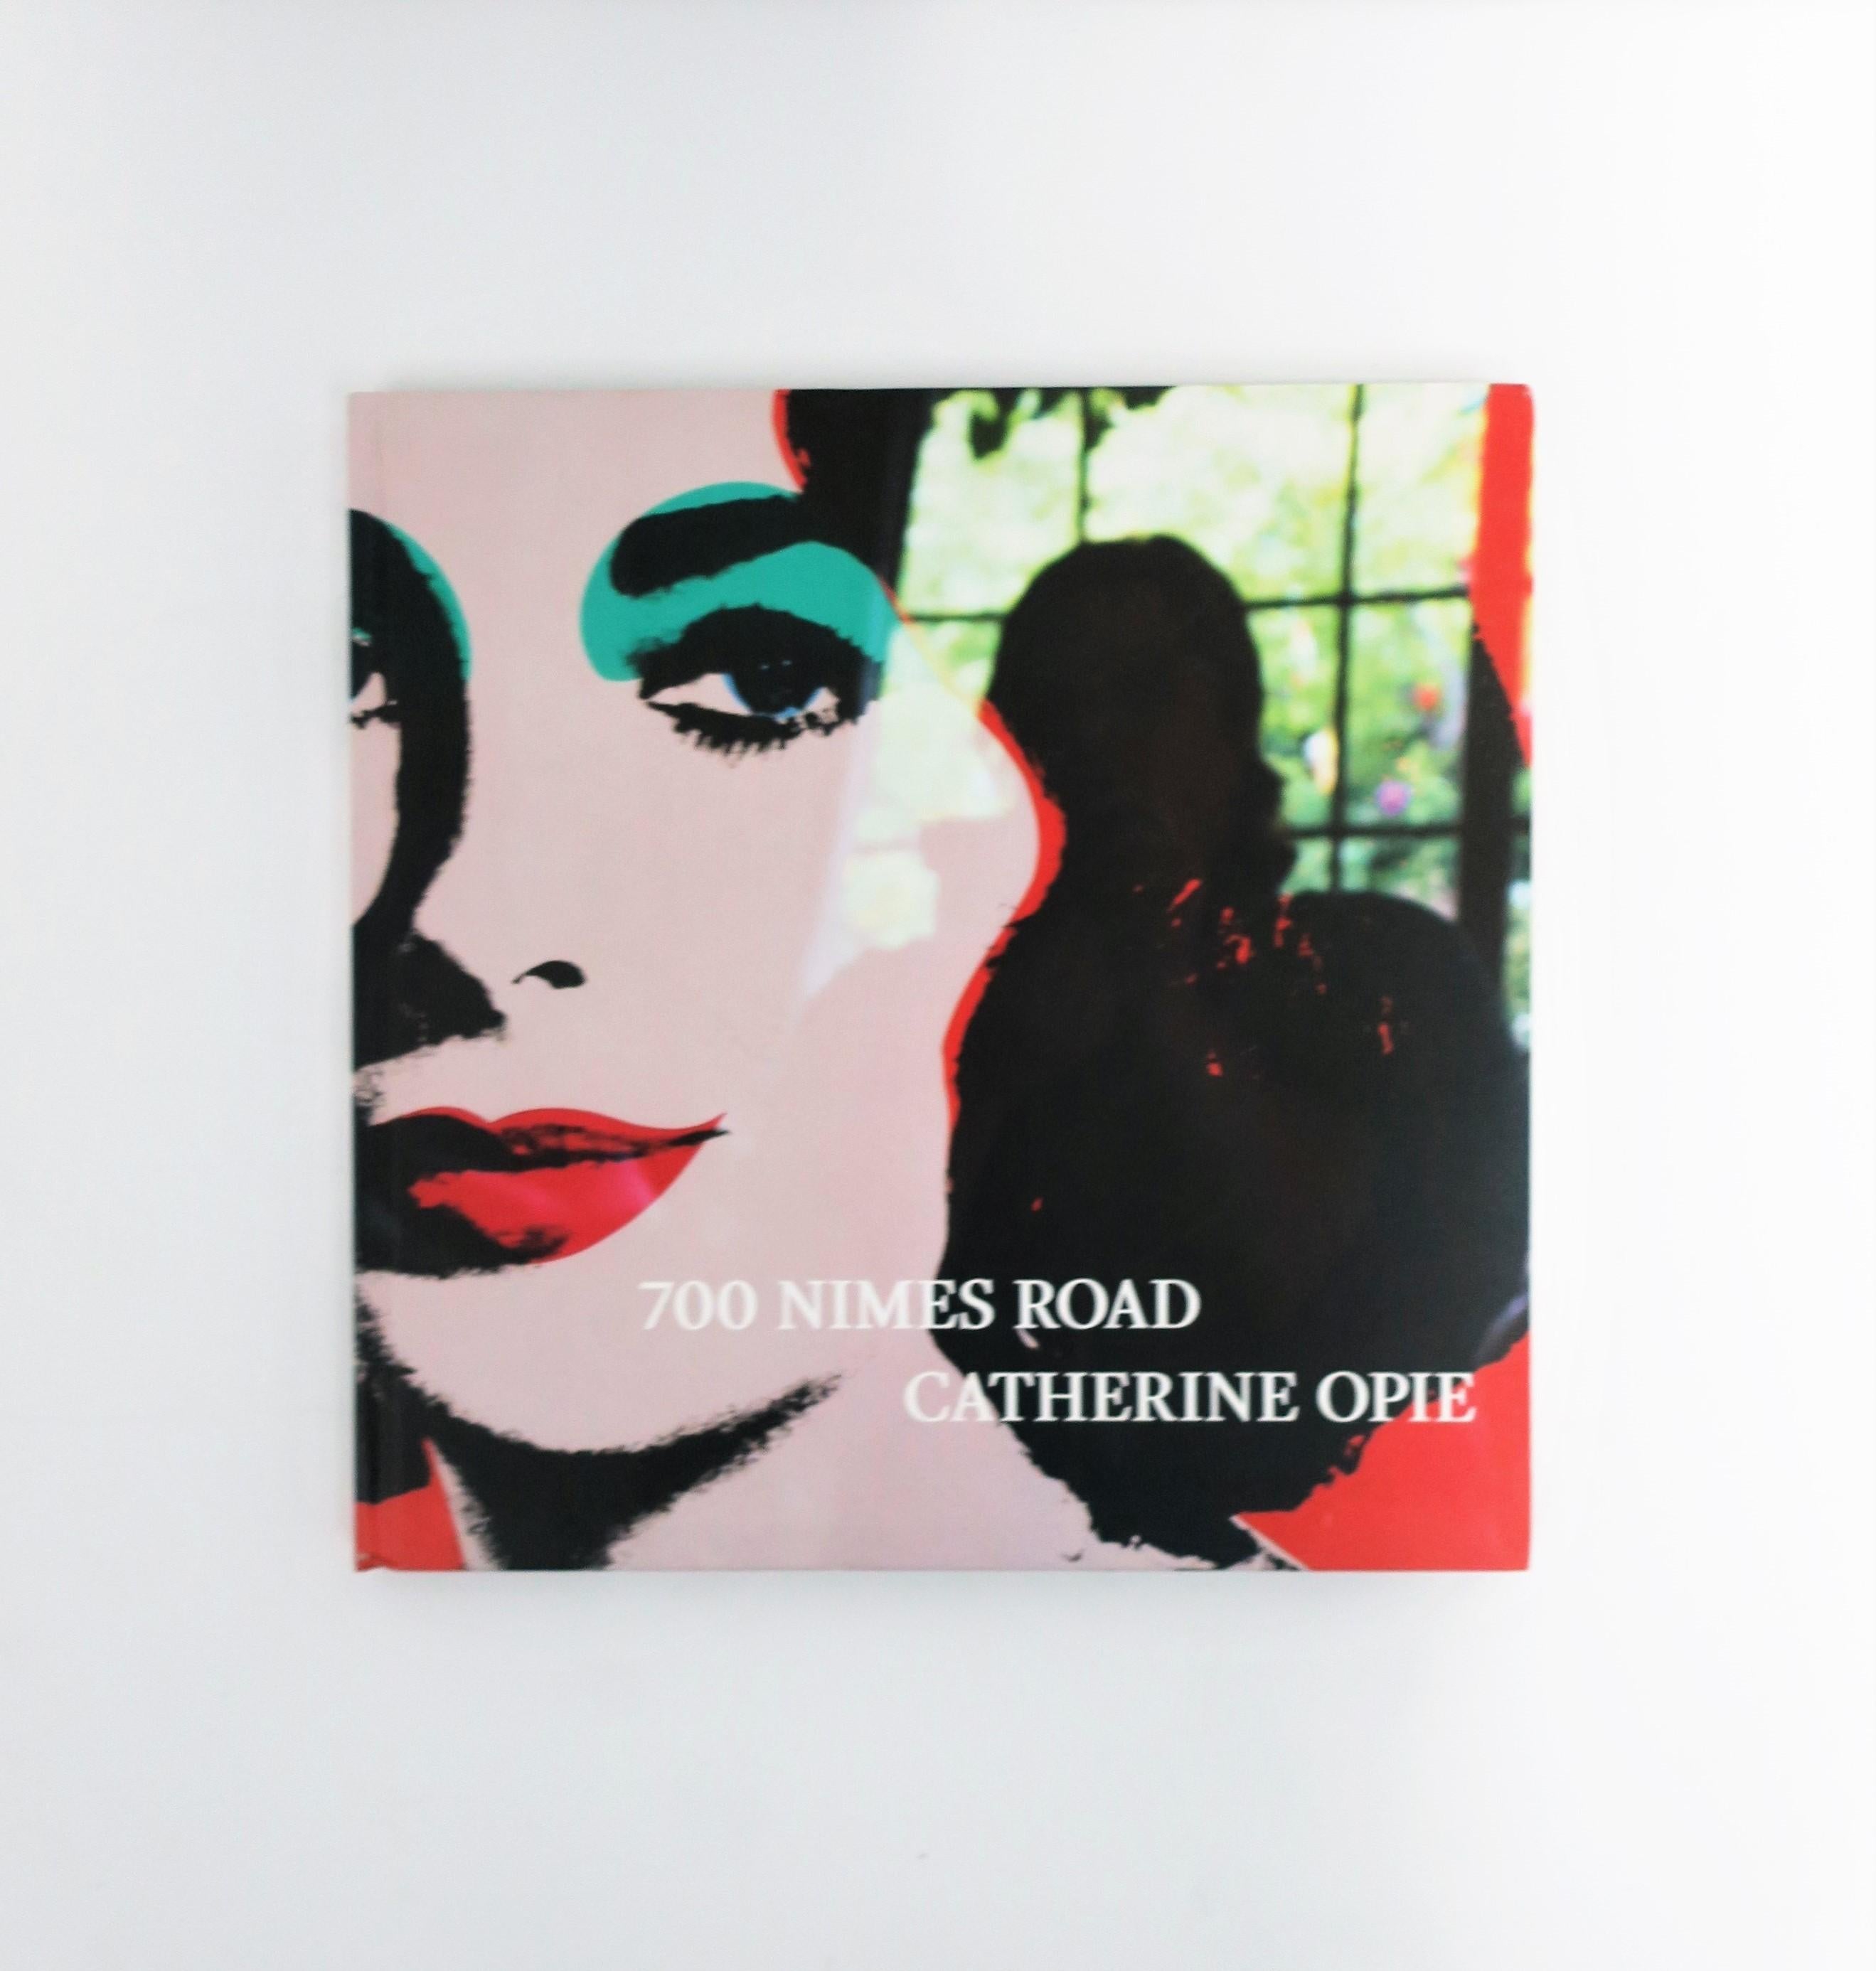 A beautiful hard-cover coffee table or library book in memory of Elizabeth Taylor; 